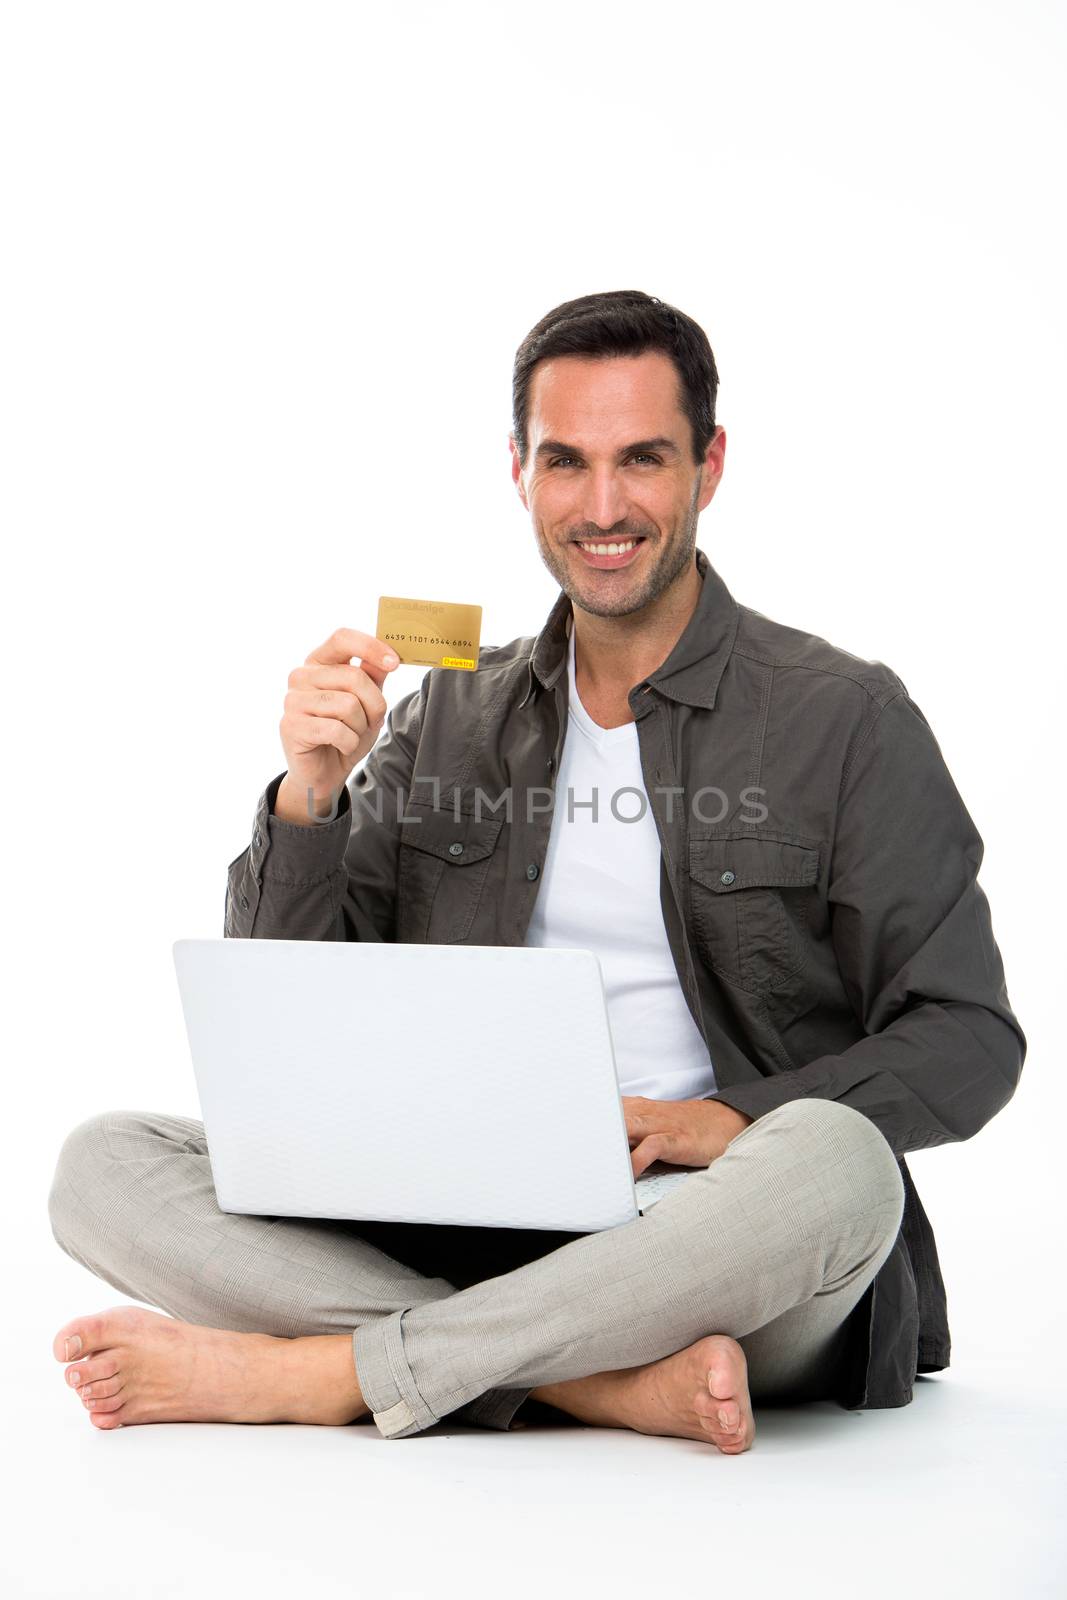 Man sitted on the floor, smiling at camera, showing credit card and buying online